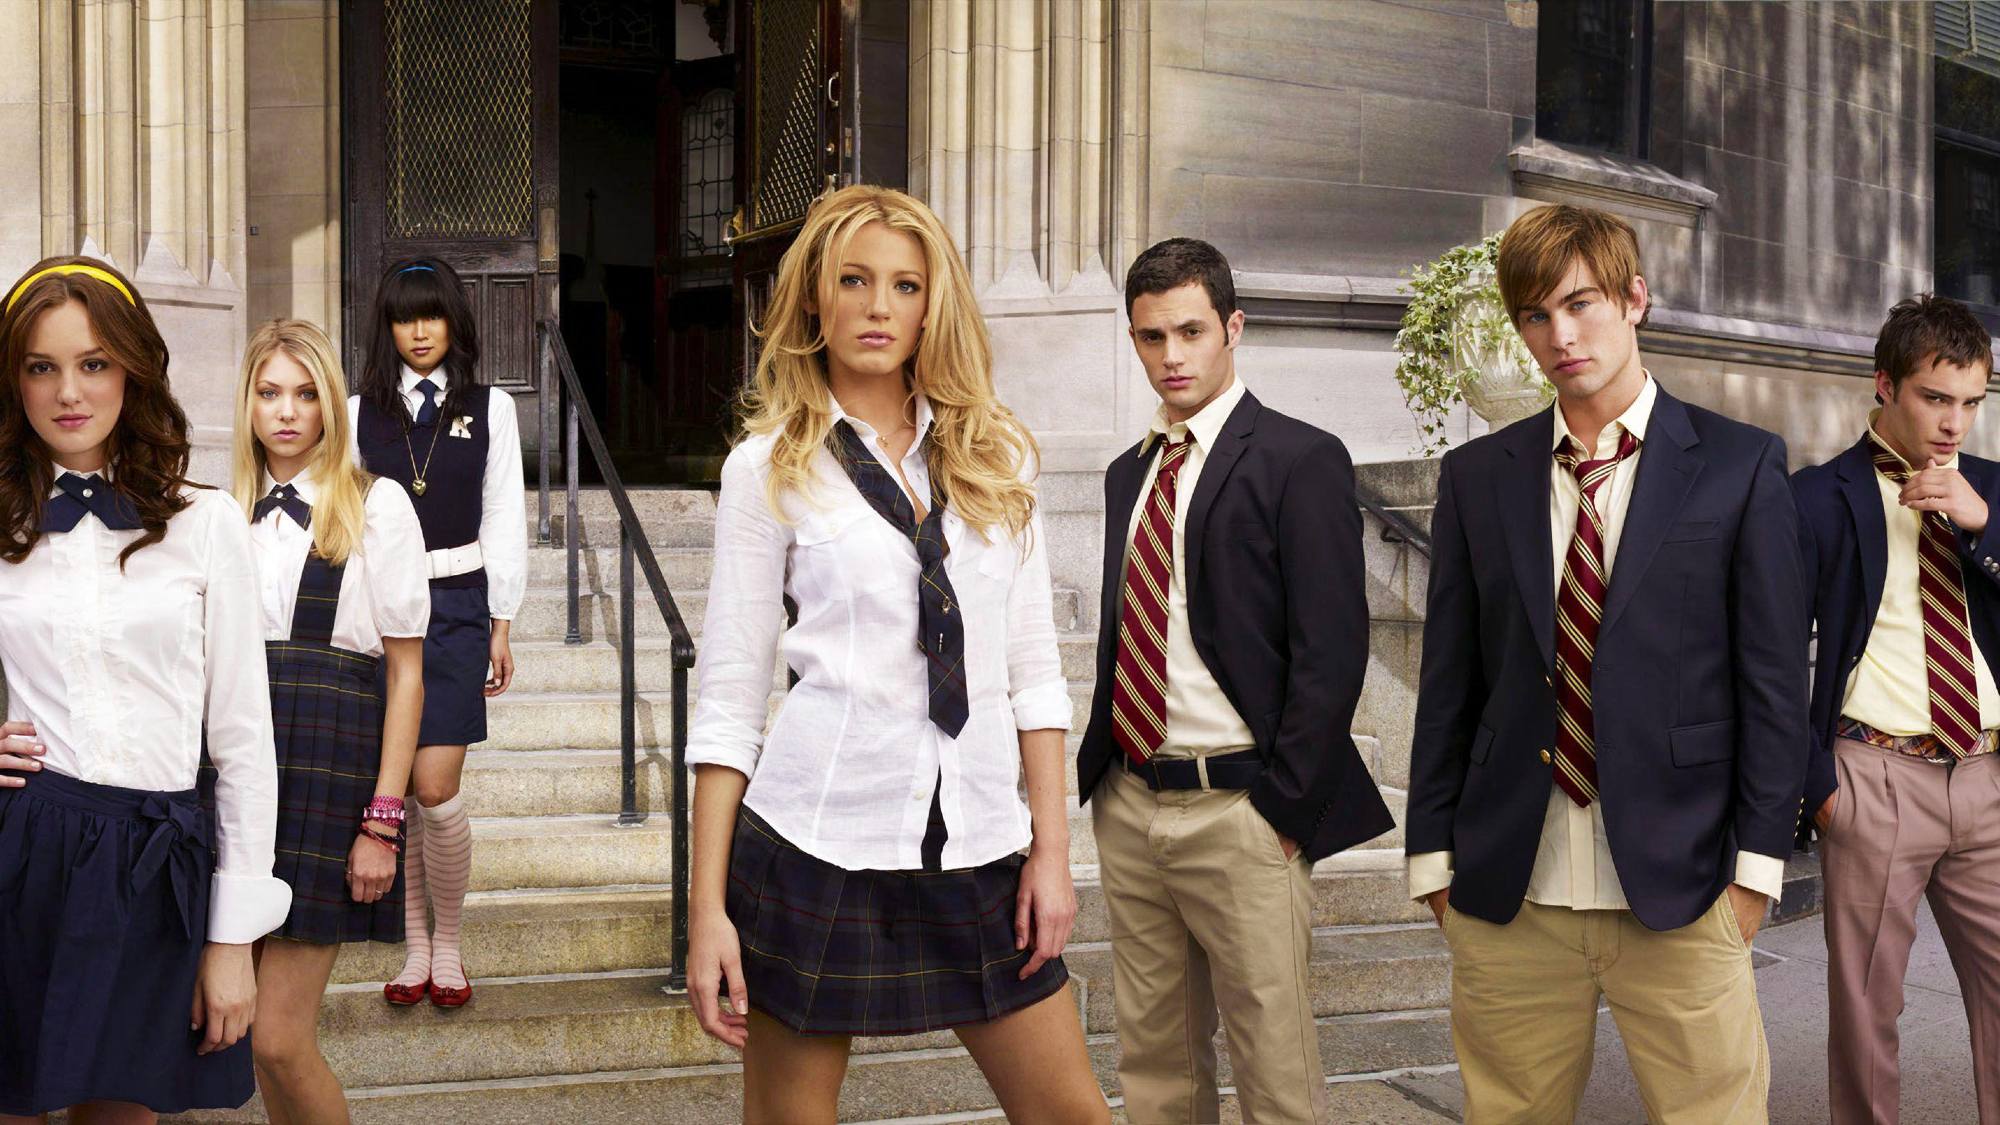 (L to R) Leighton Meester as Blair, Blake Lively as Serena, Penn Badgley as Dan, Chase Crawford as Nate and Ed Westwick as Chuck in art for Gossip Girl